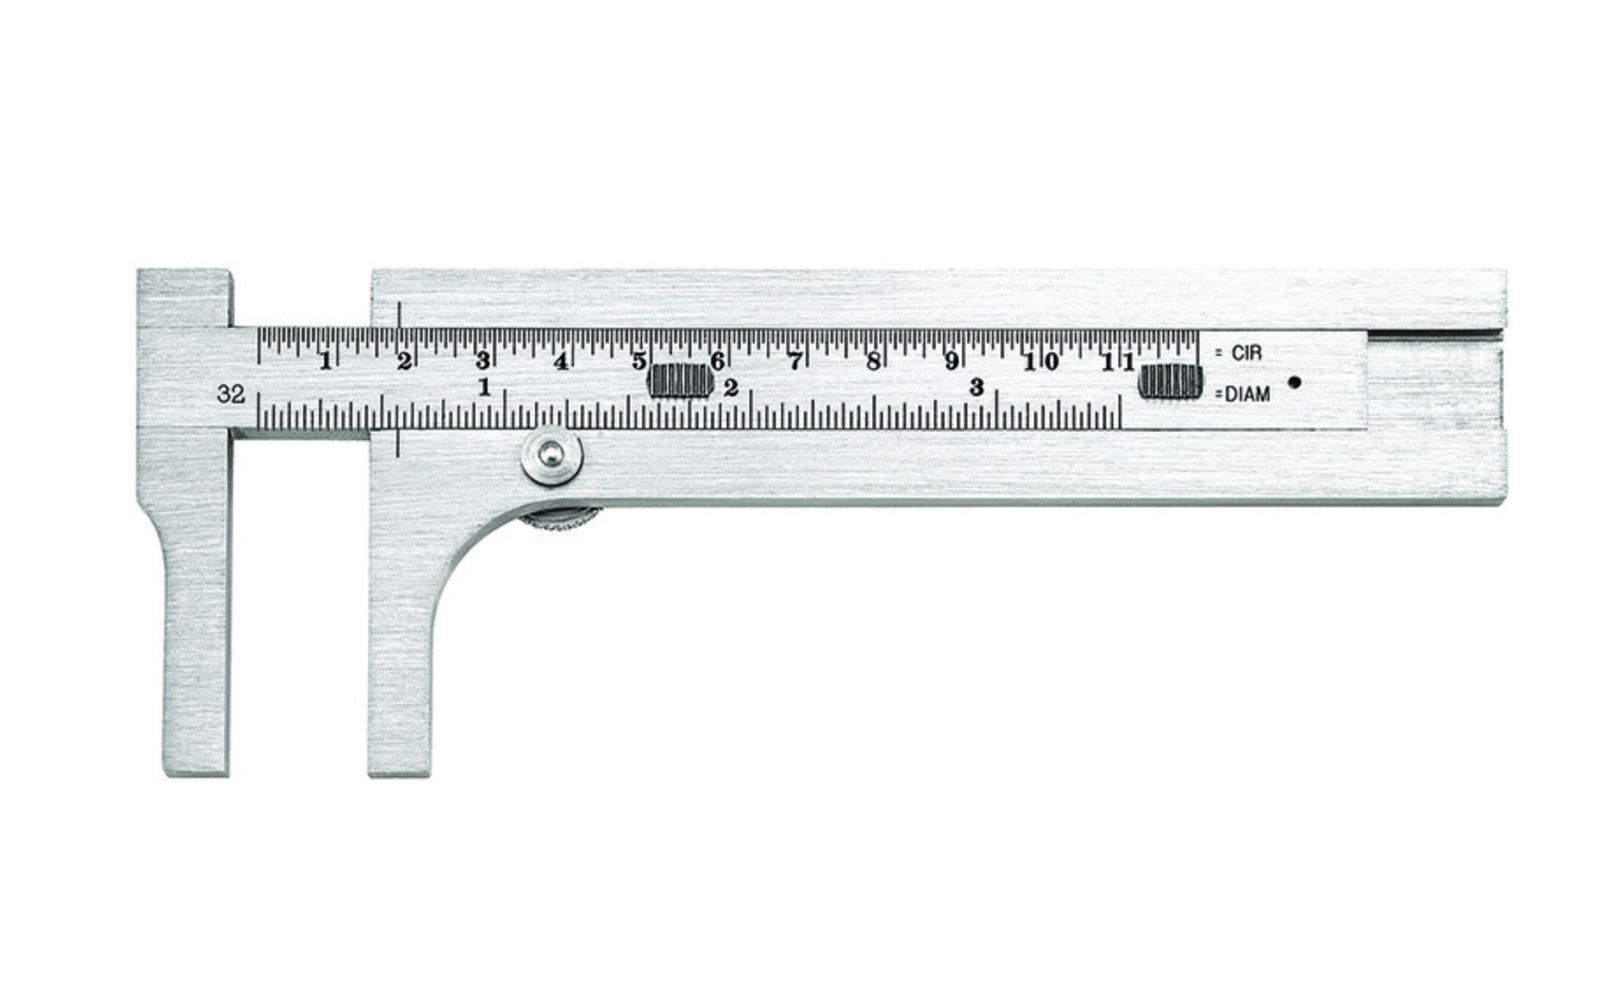 Starrett Circumference Gage & pocket slide caliper.. Made of Stainless Steel. Model 424. 049659515275 Made in USA.